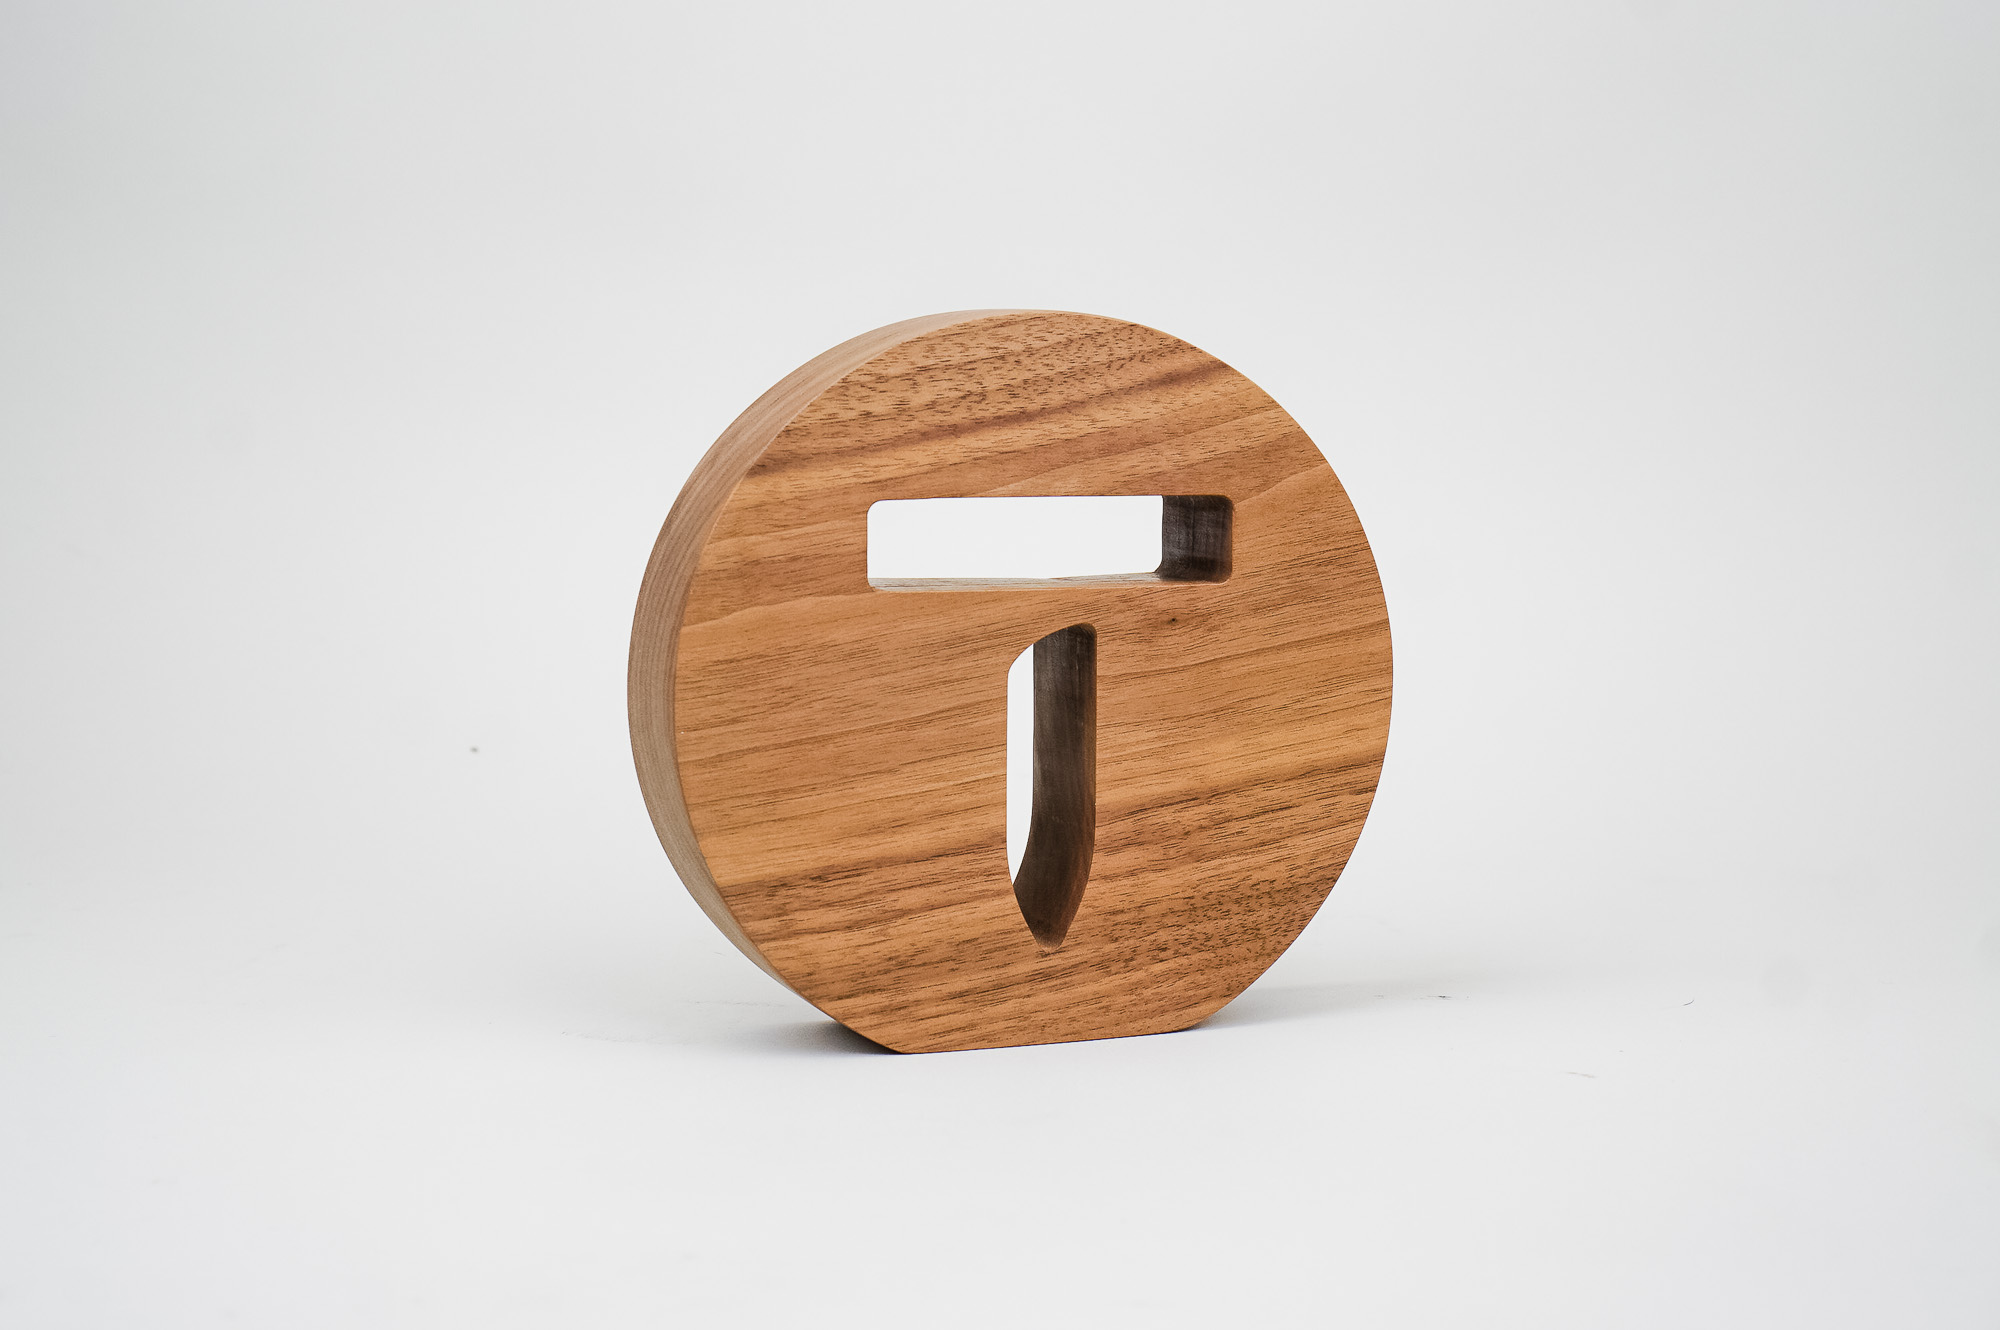 Solid walnut tabletop sign for Thumbtack, a San Francisco based online service that matches customers with local professionals